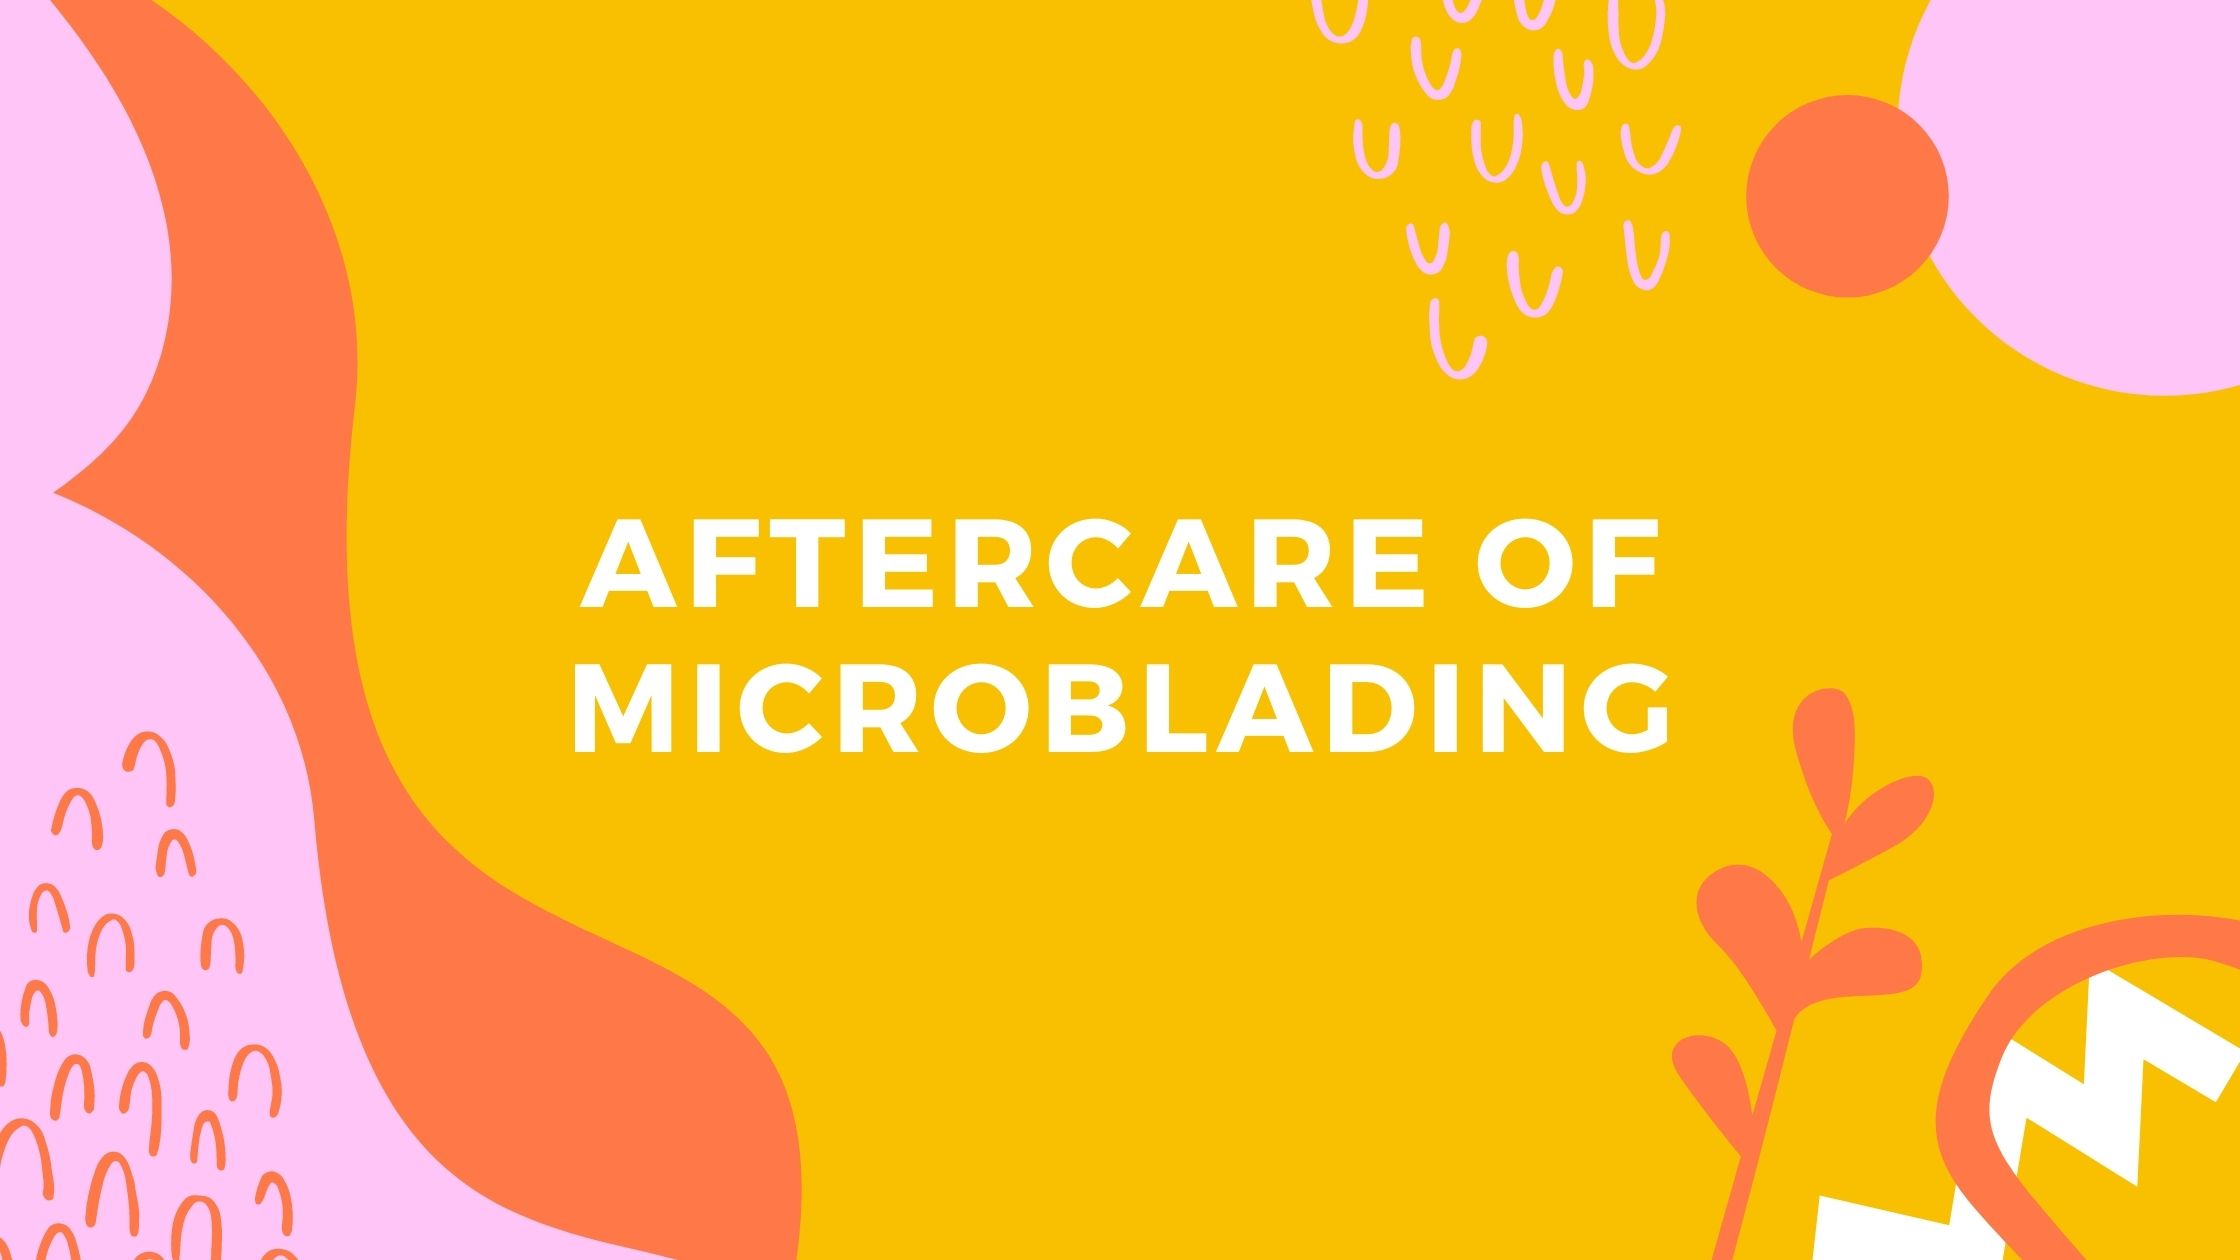 Aftercare of Microblading